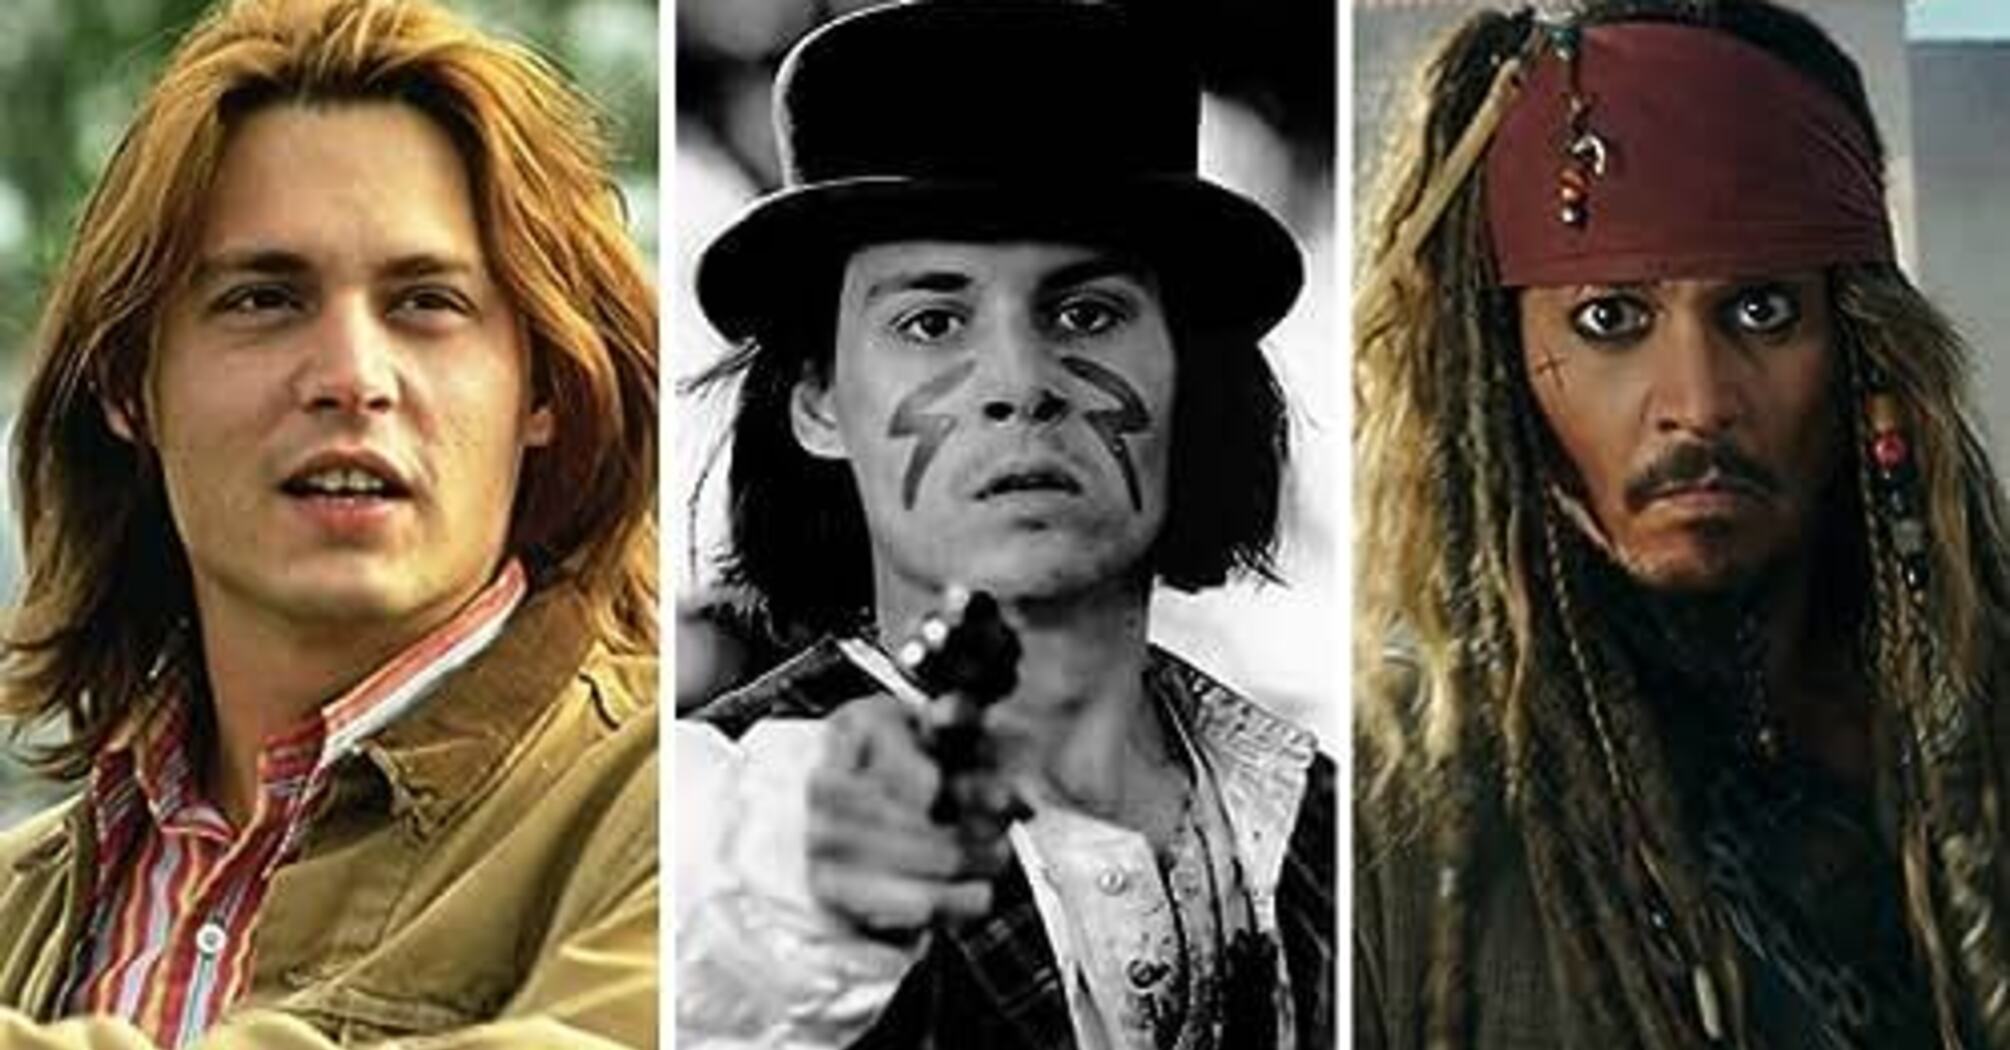 5 fascinating facts from the life of the charismatic Johnny Depp